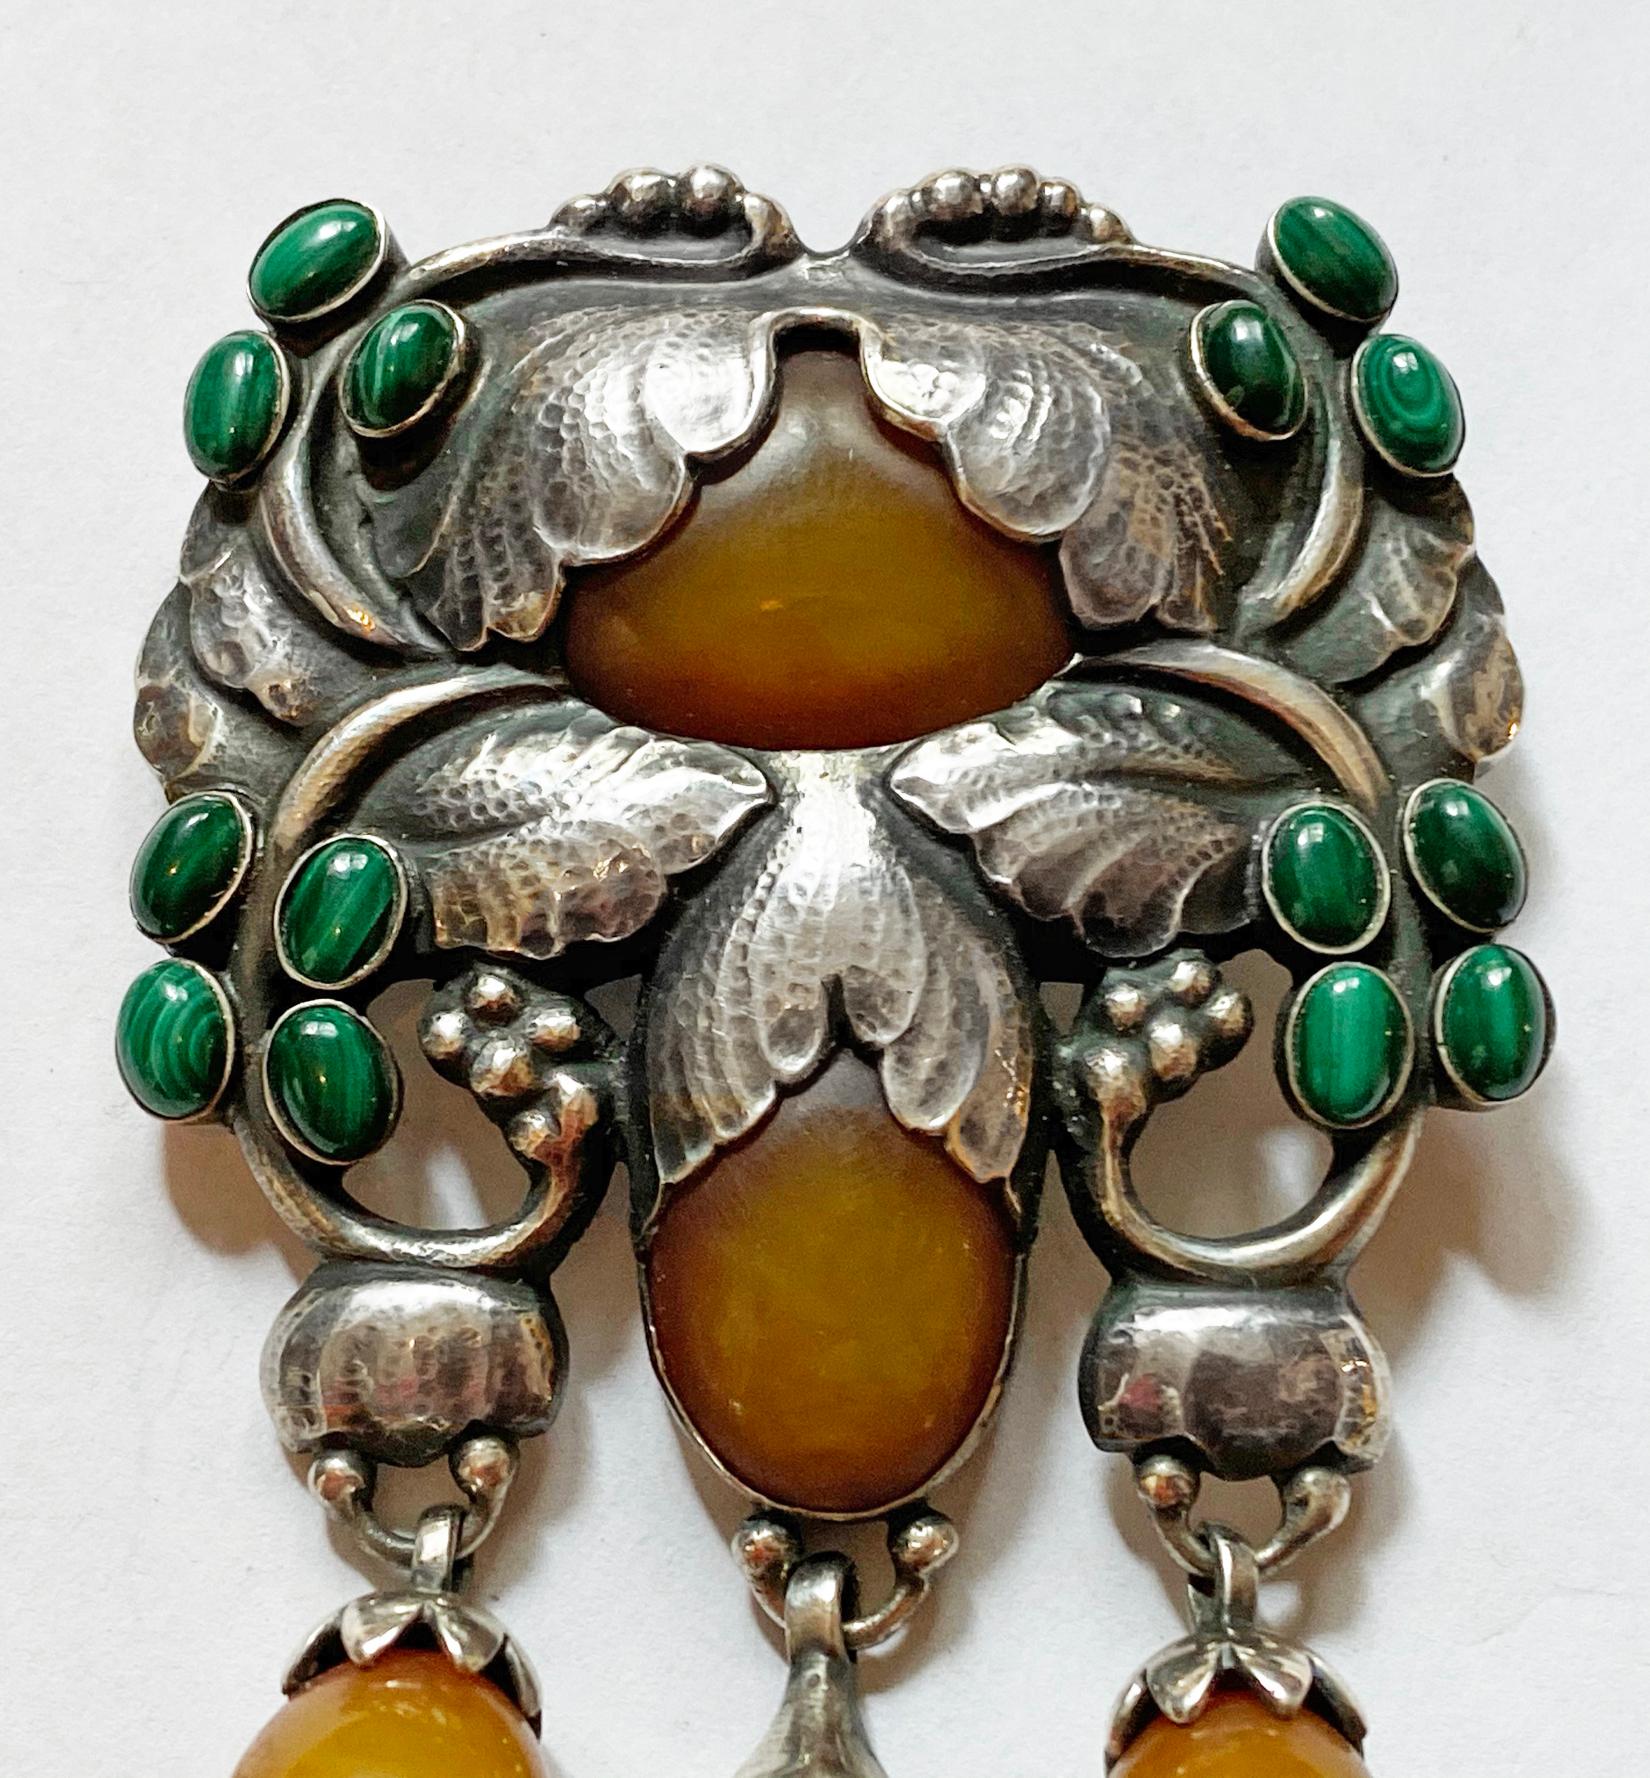 Exceptional  Georg Jensen large rare design Silver and Amber and Malachite Master Brooch, C.1933. Georg Jensen. Designed as foliate and bud motifs set with and suspending amber cabochons and drops, with malachite cabochons, no. 96, 10.0 x 6.2 cm,